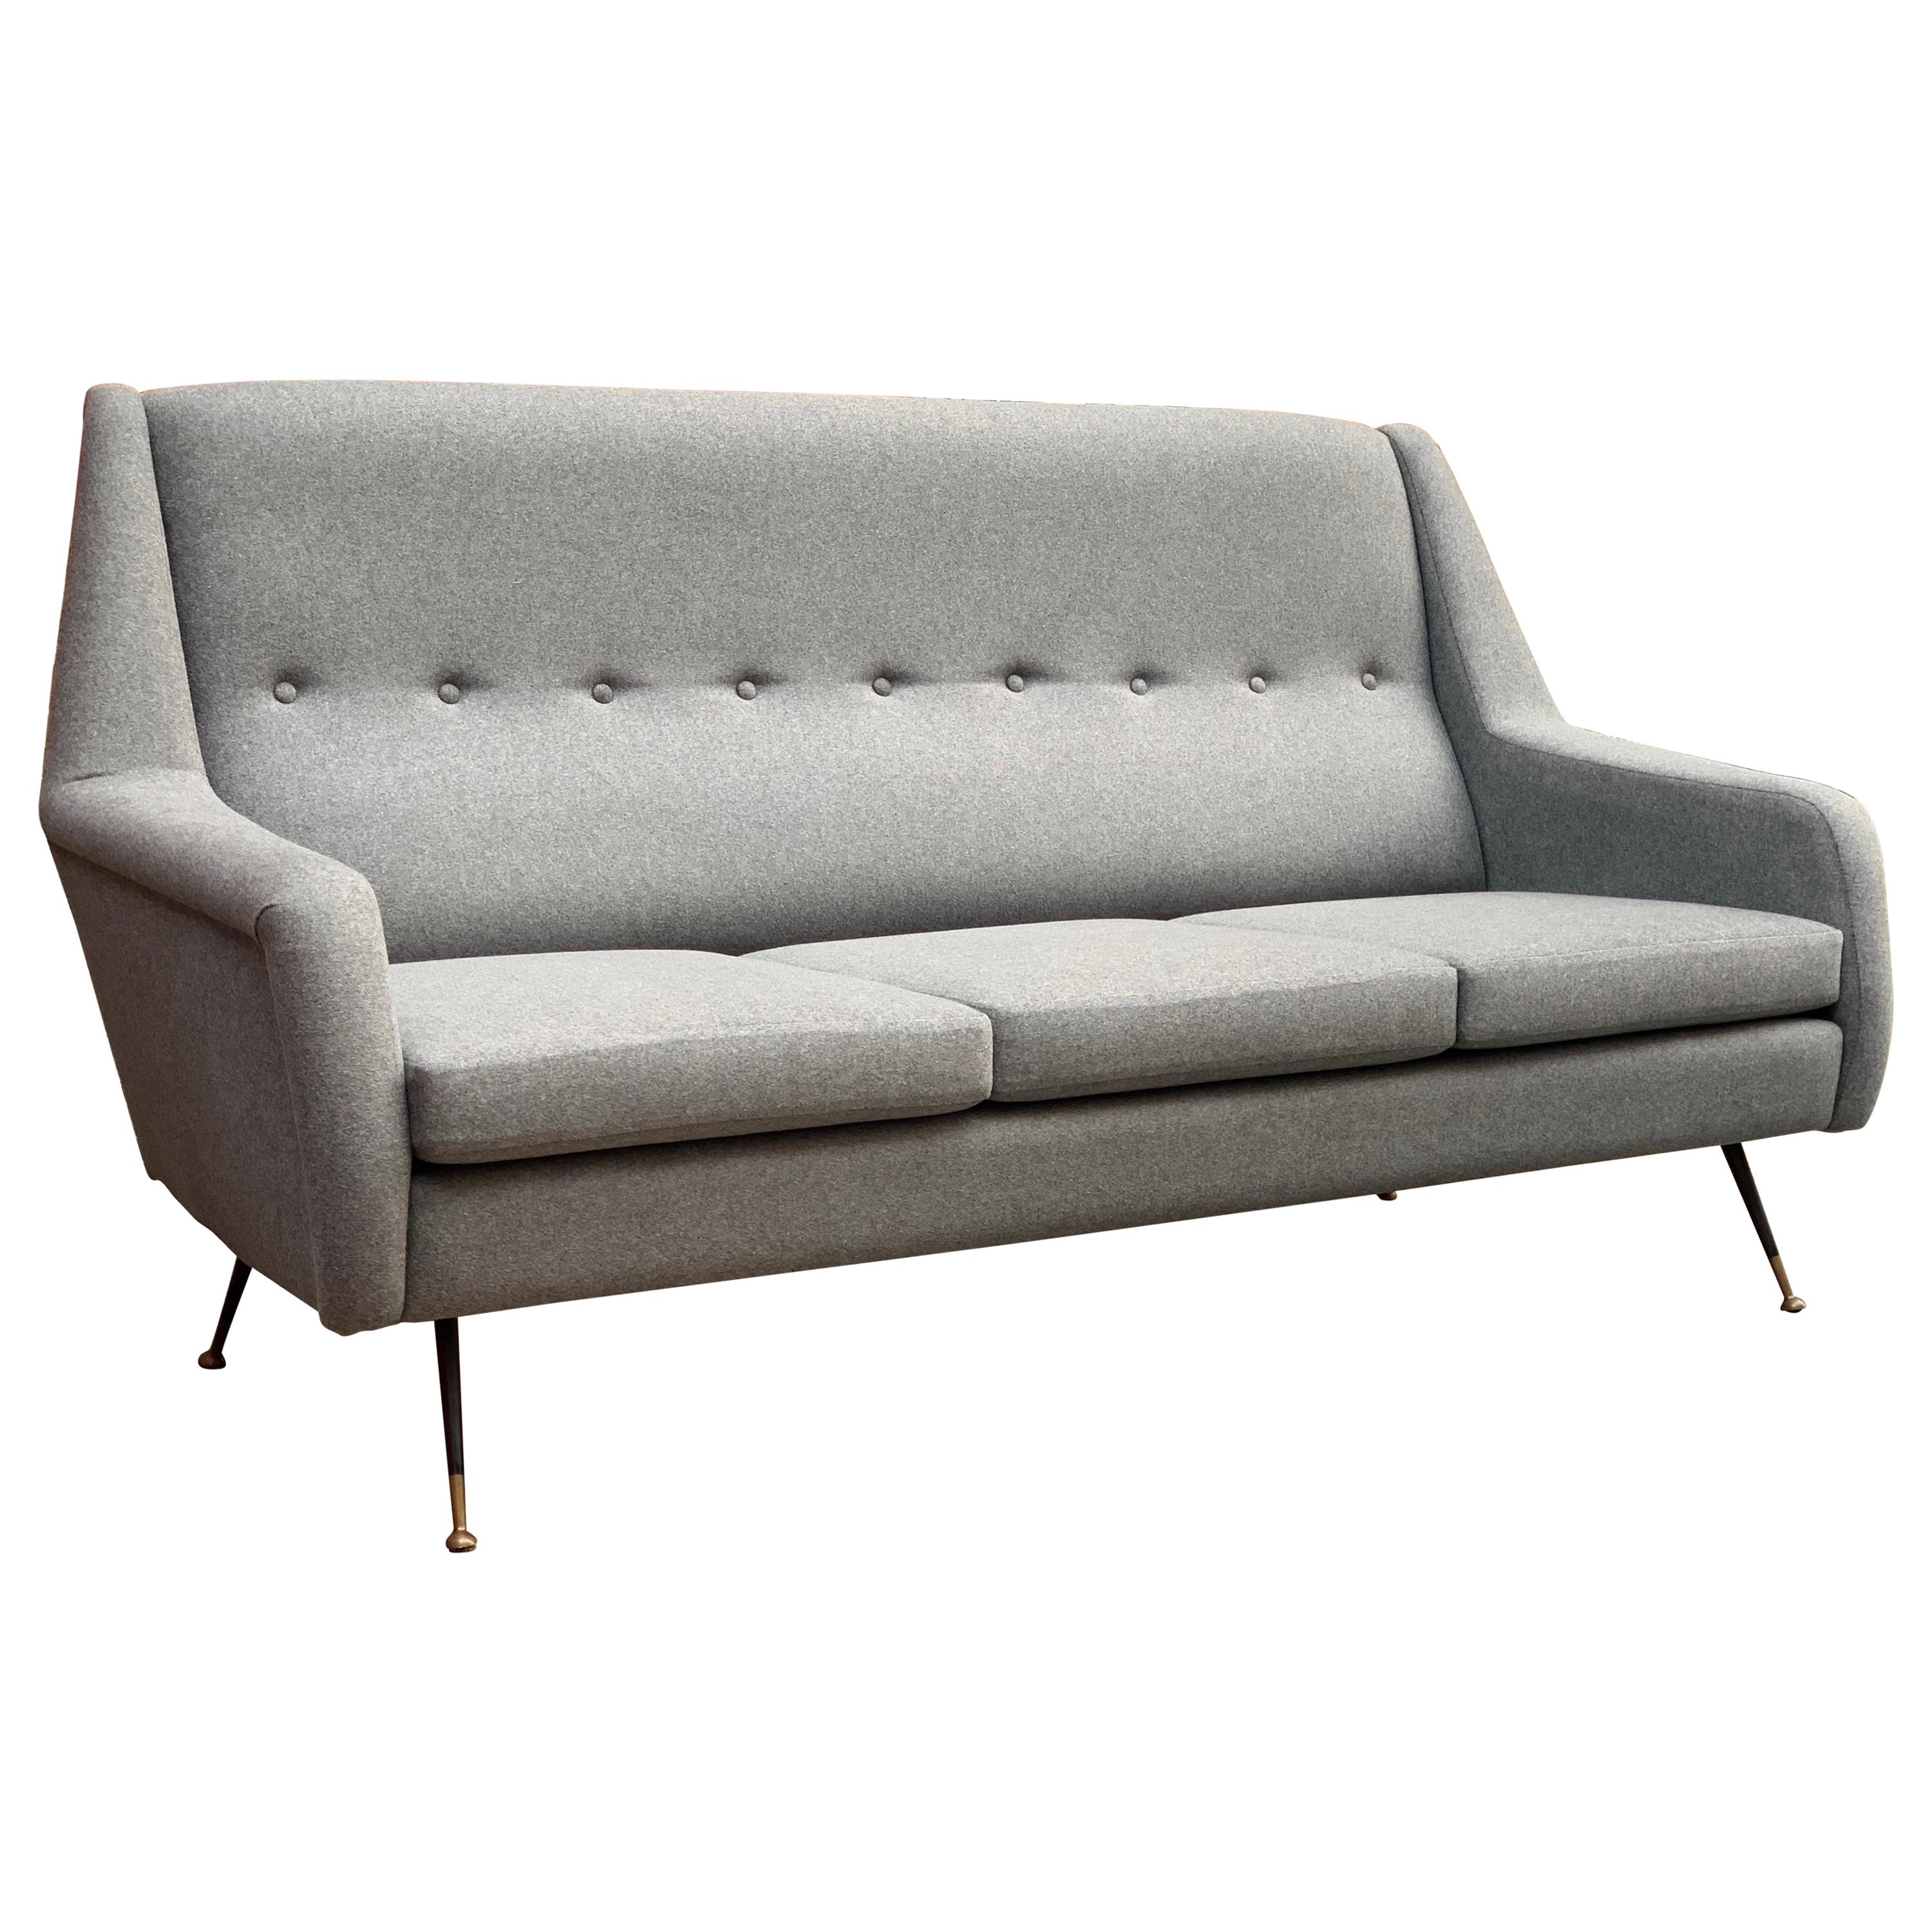 Italian Midcentury Tufted Sofa by Ico Parisi in Grey Flannel For Sale